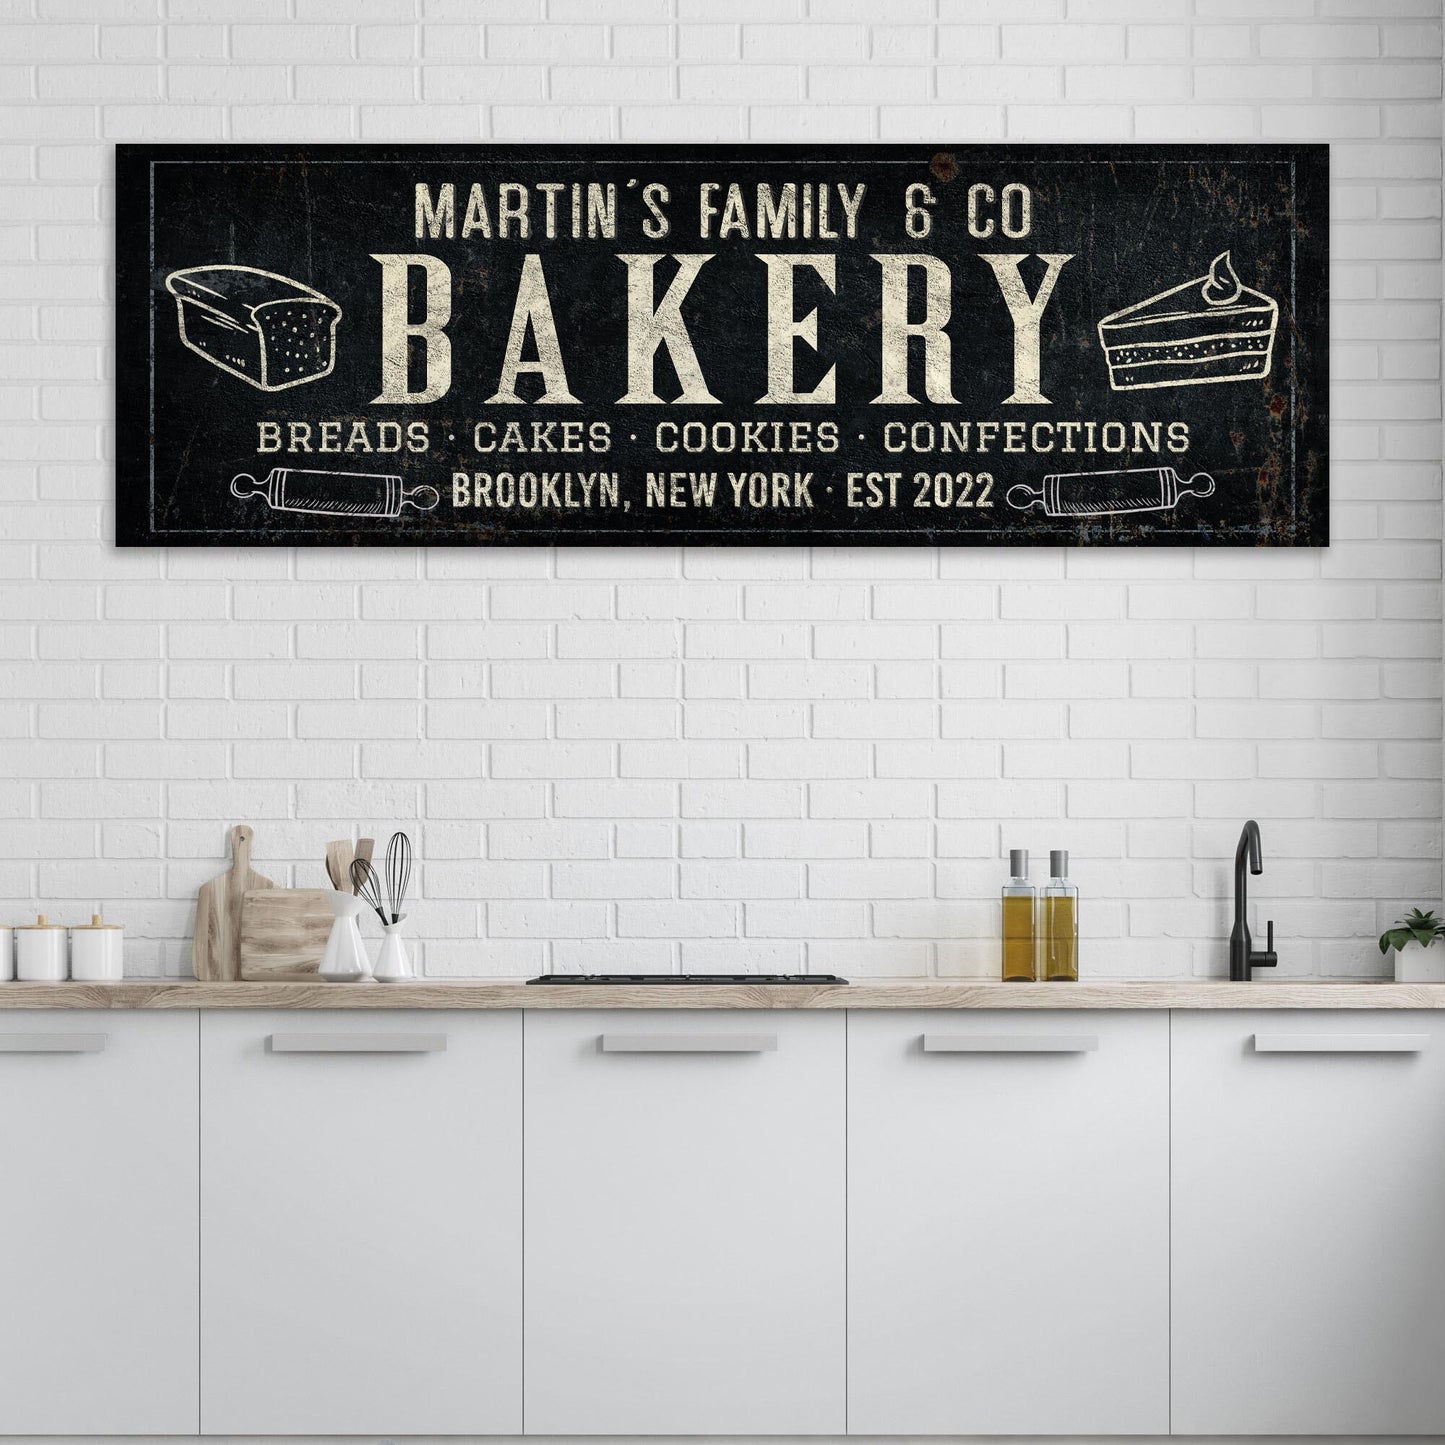 Breads, Cakes, Cookies, Confections Bakery Sign Style 2 - Image by Tailored Canvases